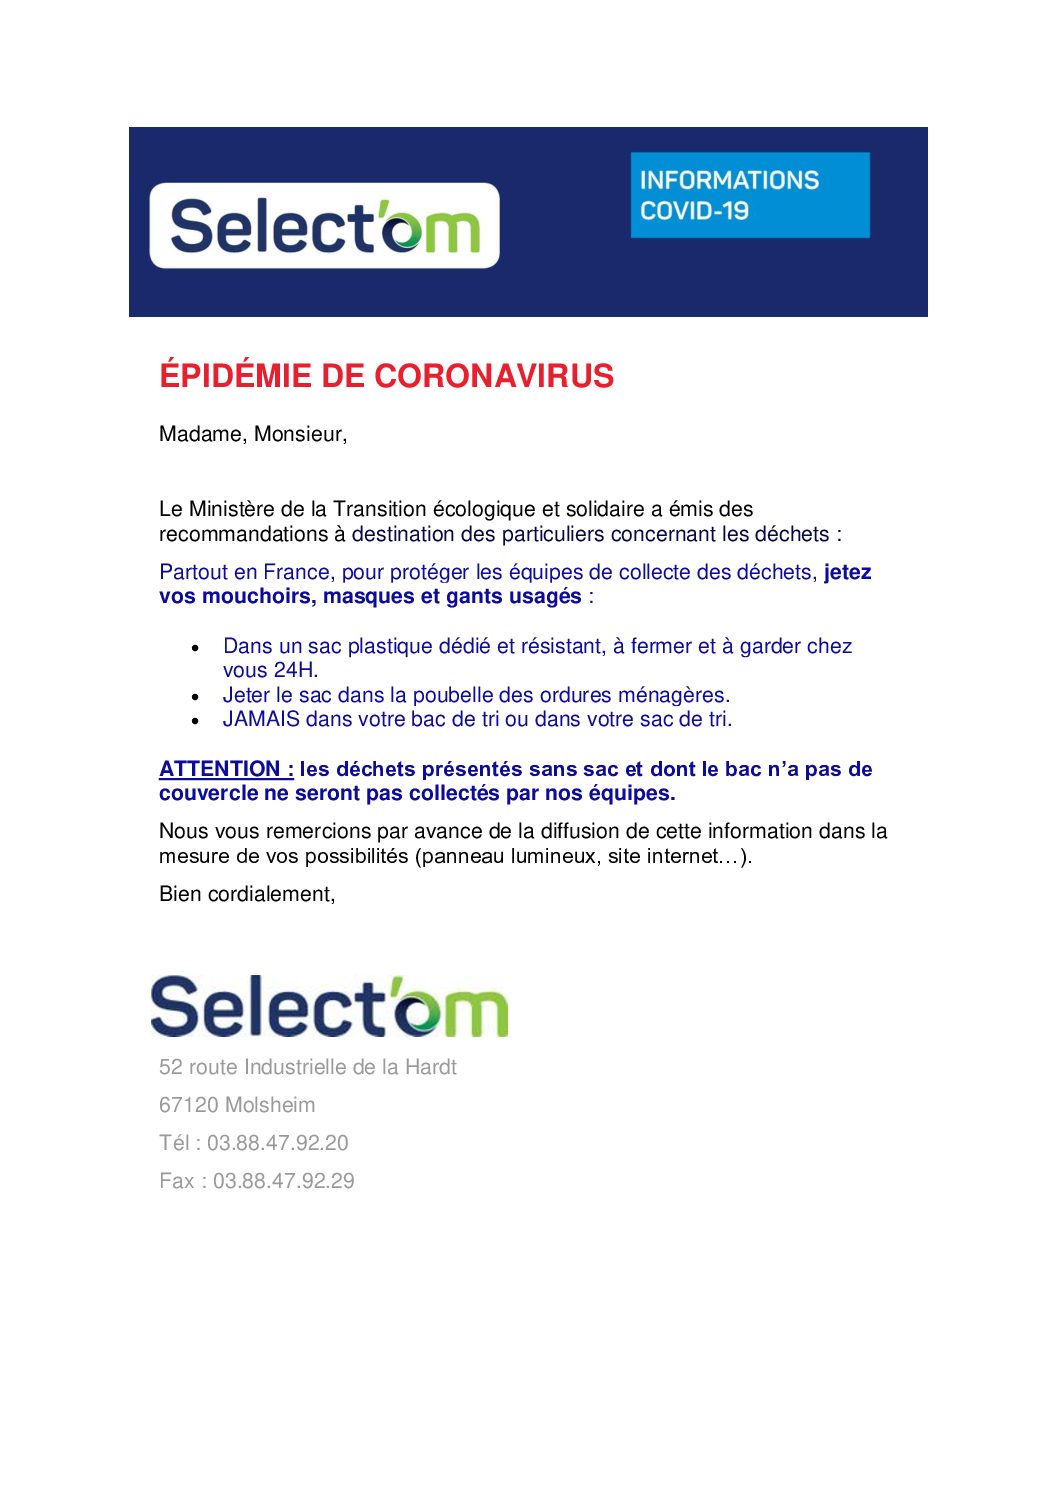 SELECT’OM – Informations COVID – 19